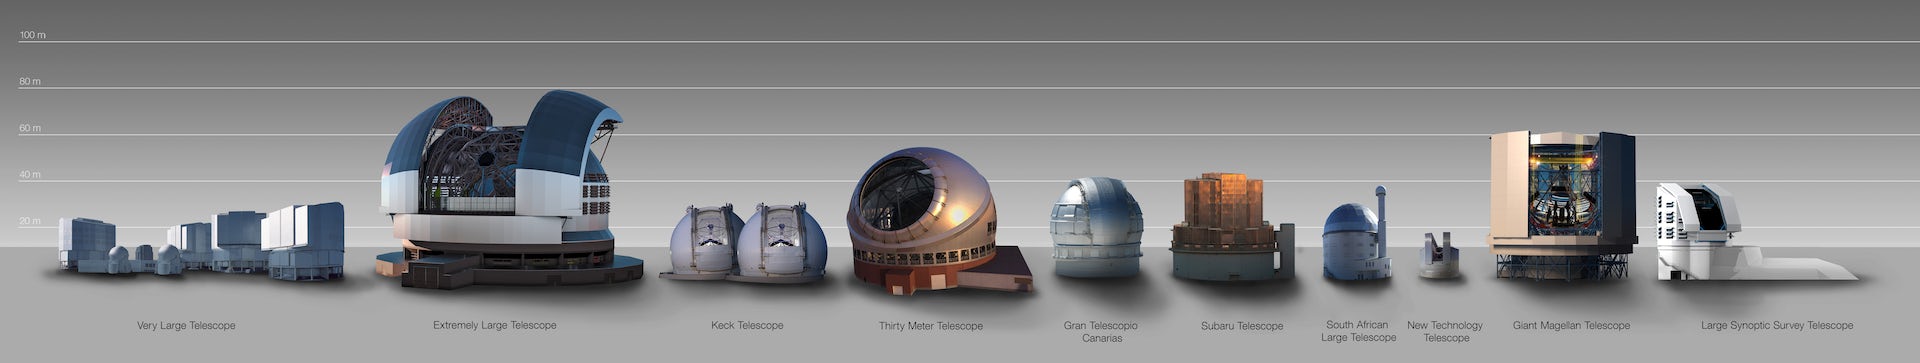 Size comparison between the ELT and other telescope domes.